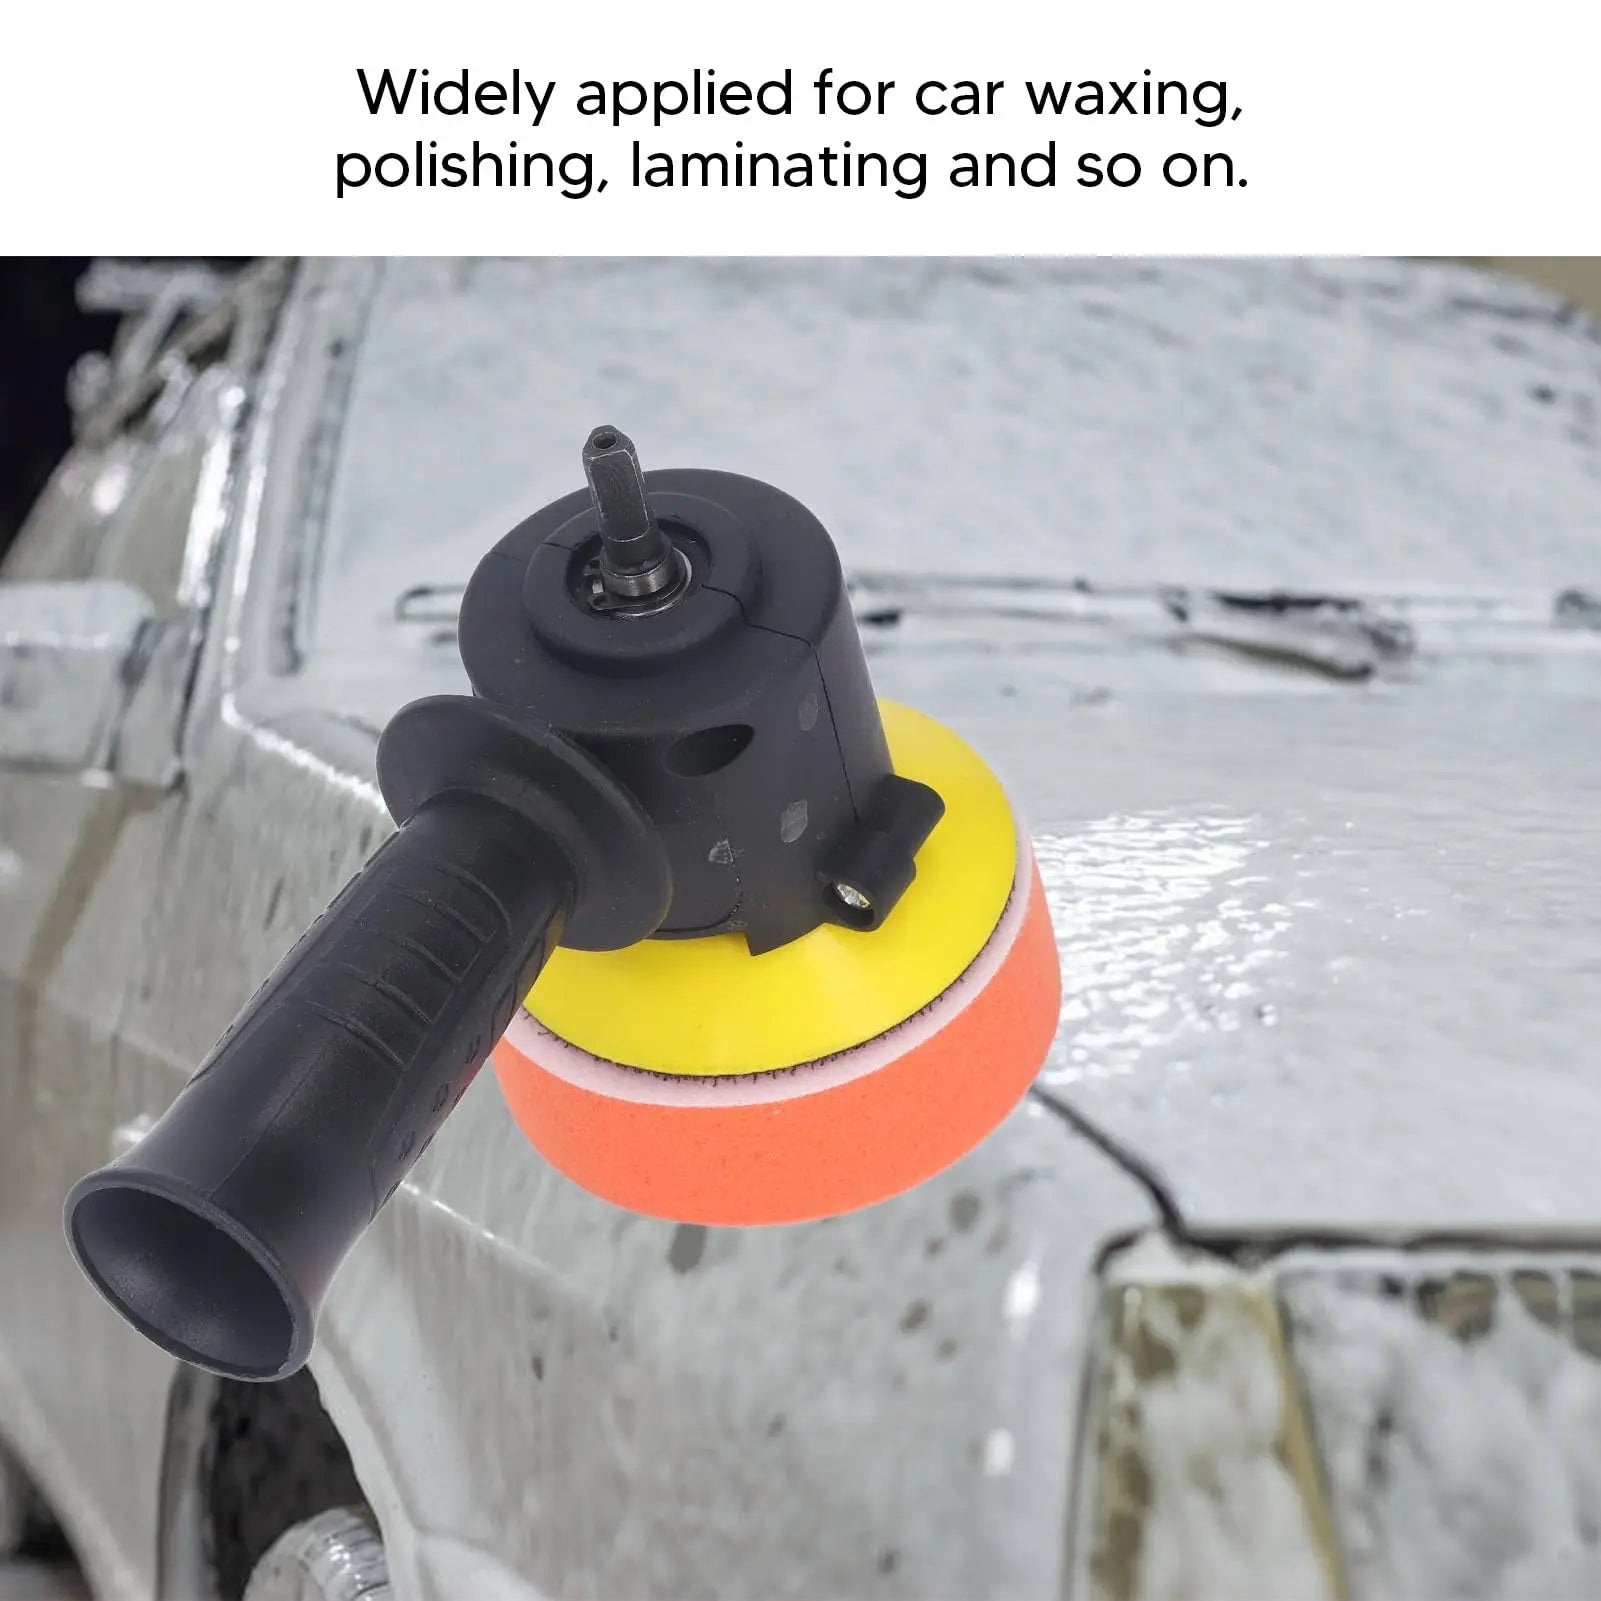 Electric Drill to Polisher Converter Adapter with Sponge Wool Disc Eccentric Polishing Tool Kit for Car Buffer Waxing Sanding